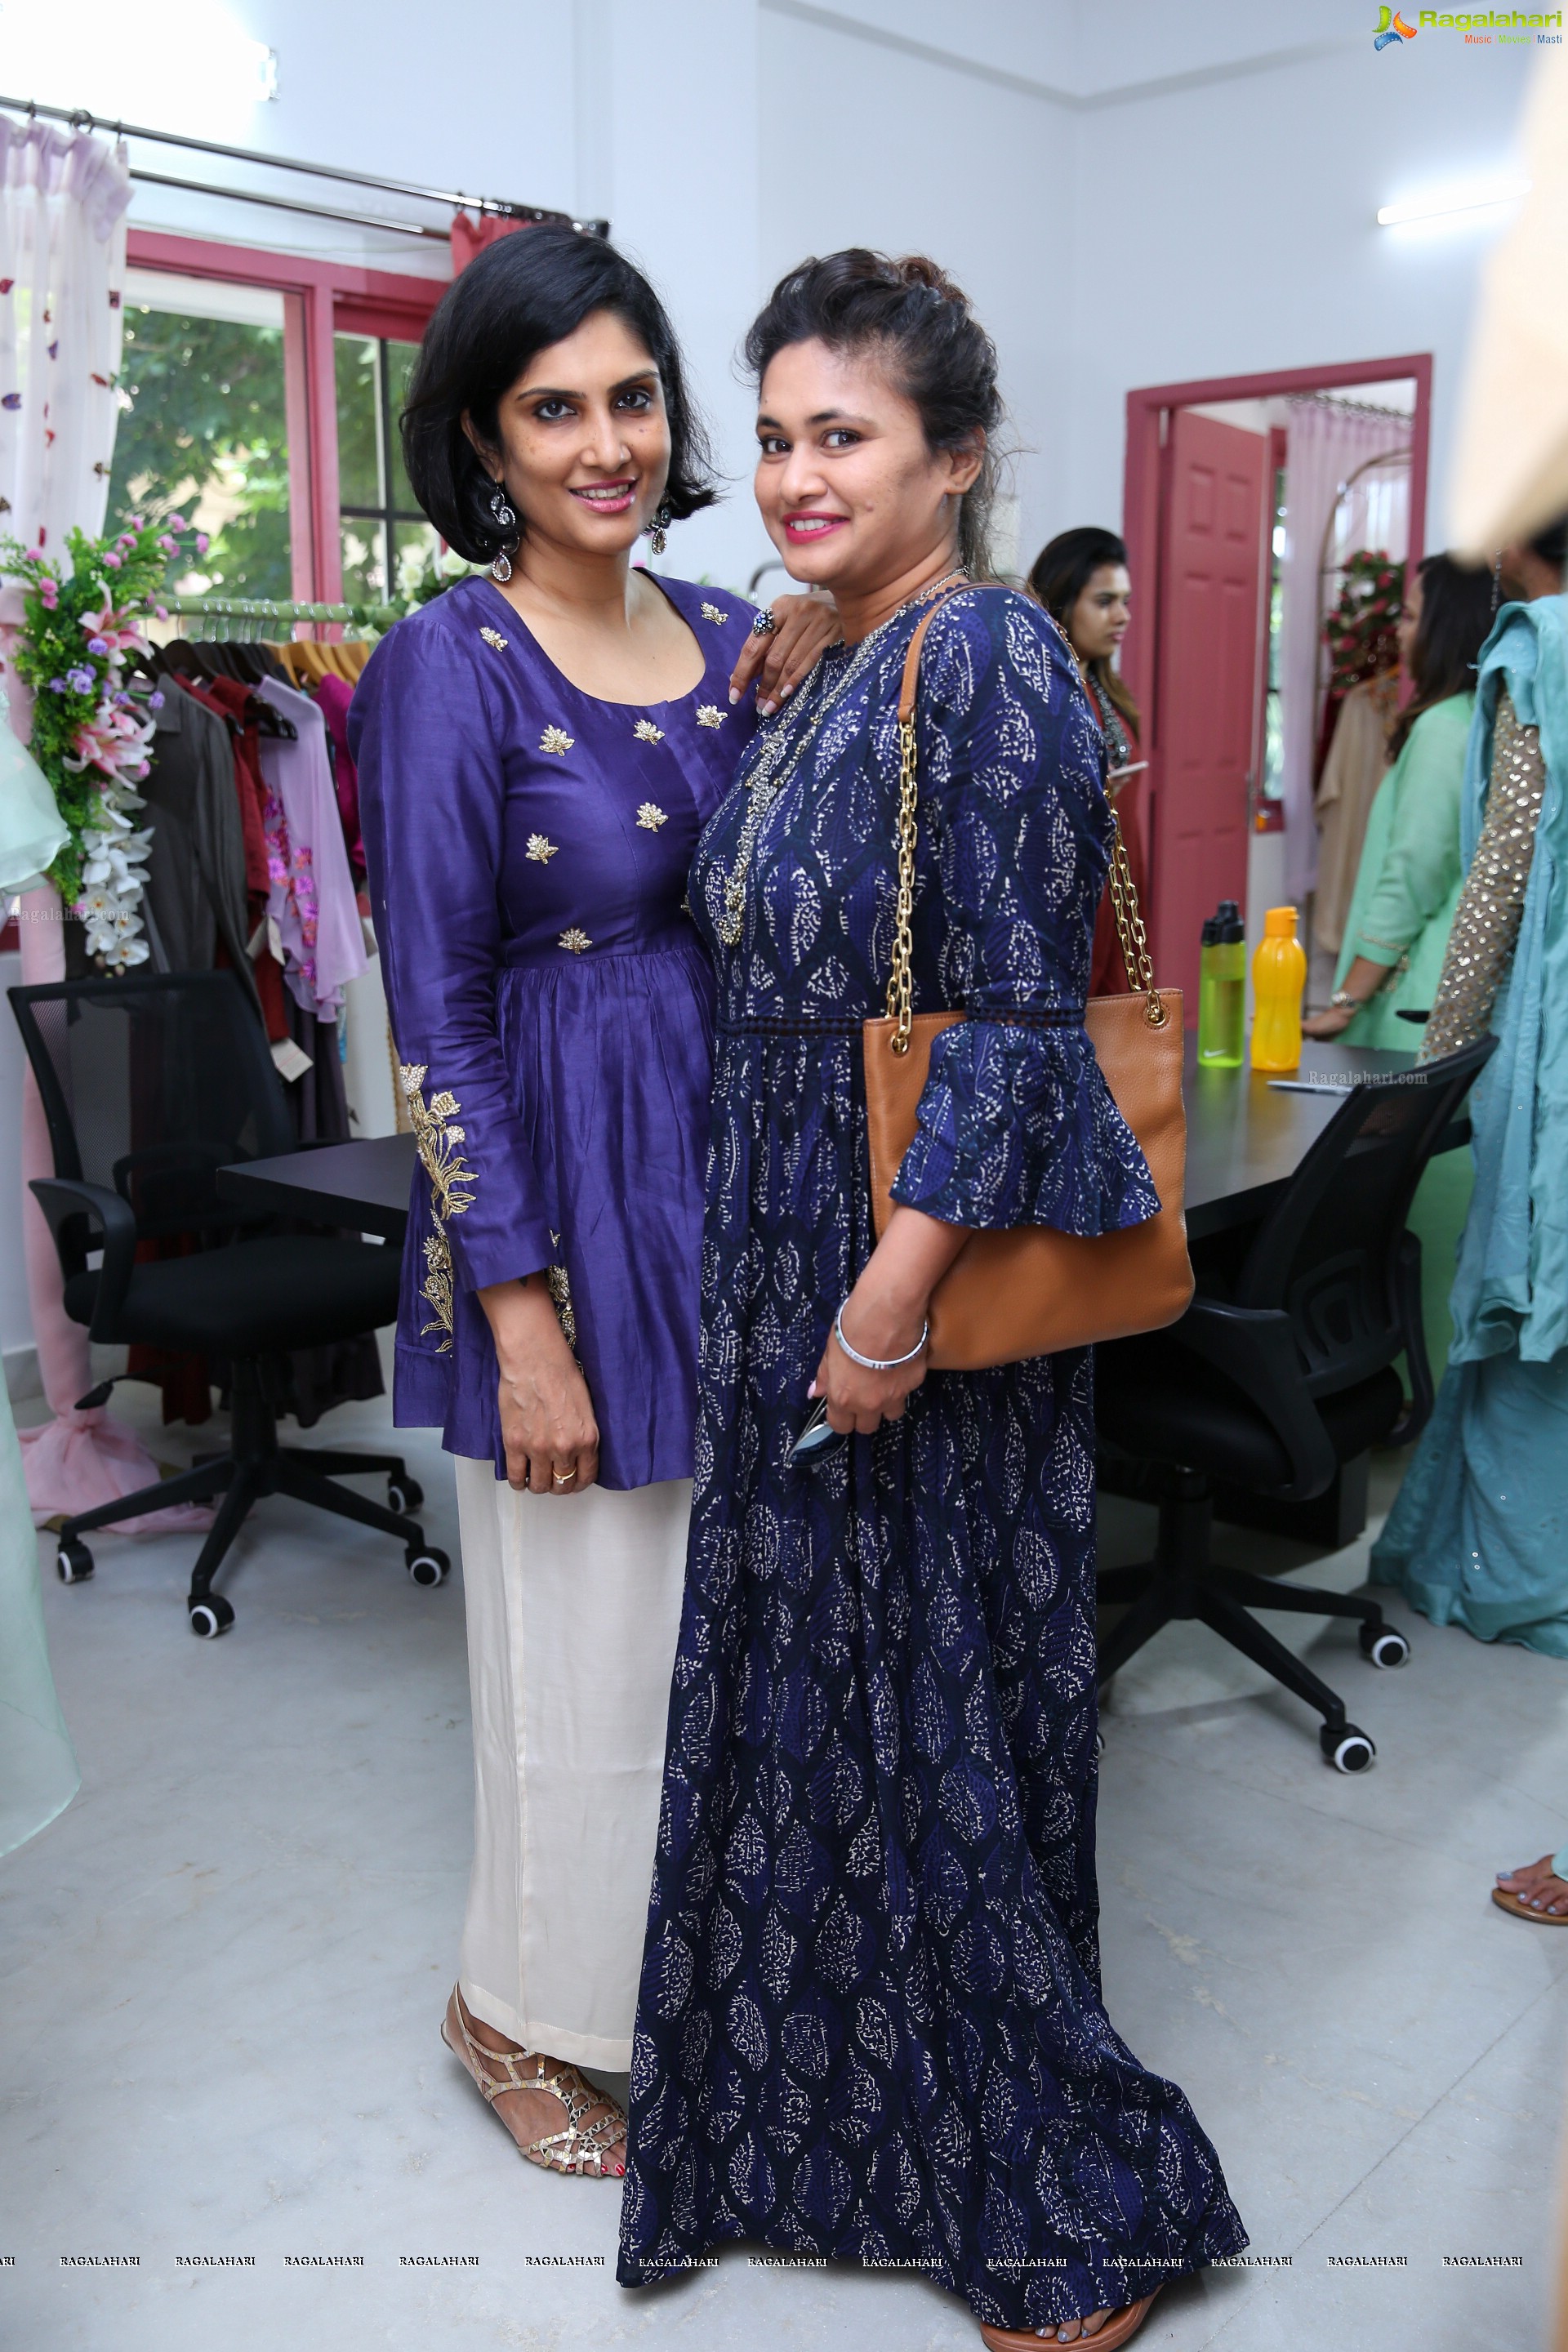 Autumn Hues - Pink Coconut New Label Launch at Pink Coconut Studio, Jubilee Hills, Hyderabad